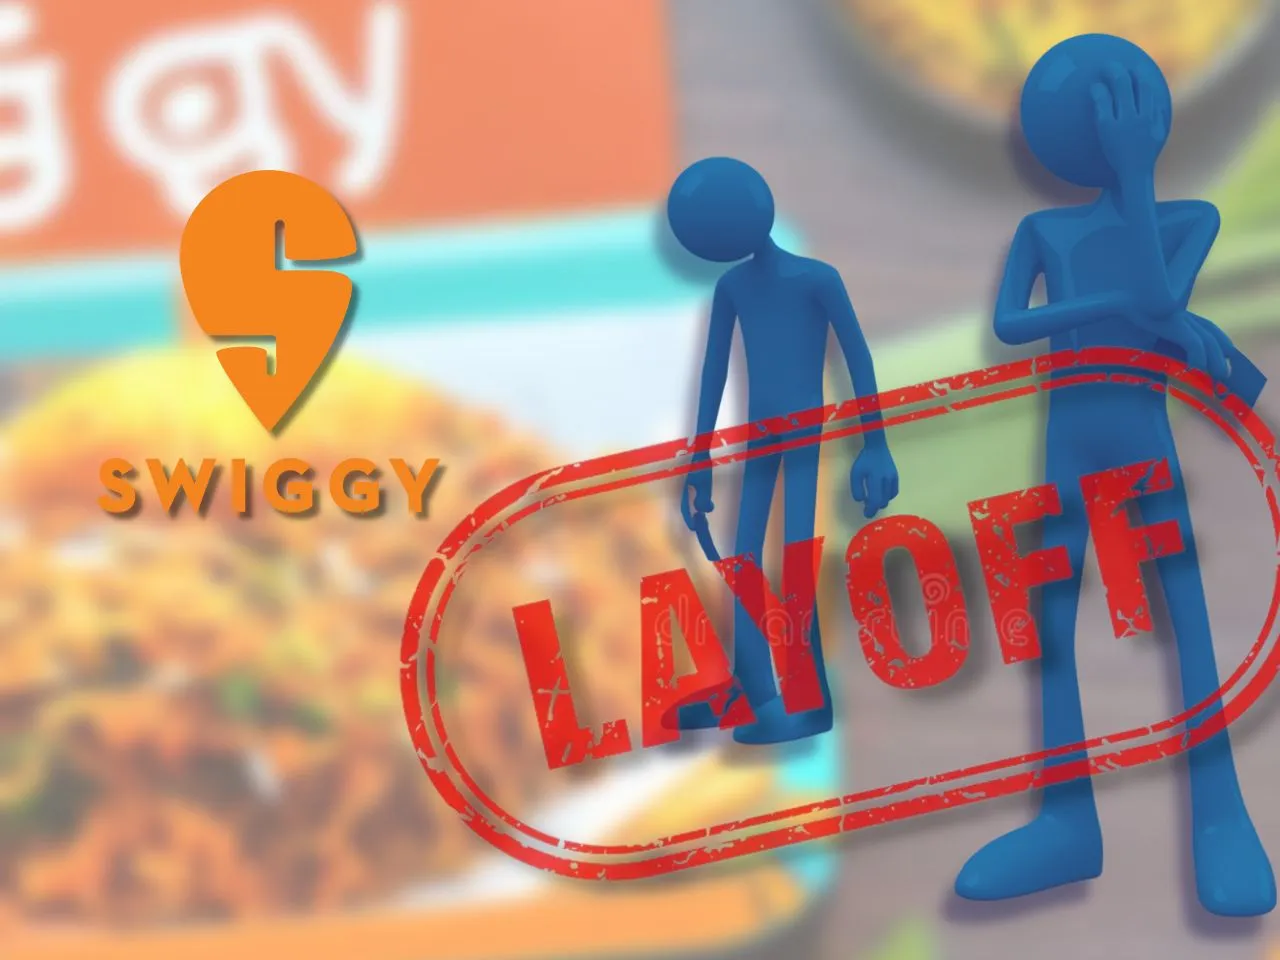 Swiggy lays off employees over email